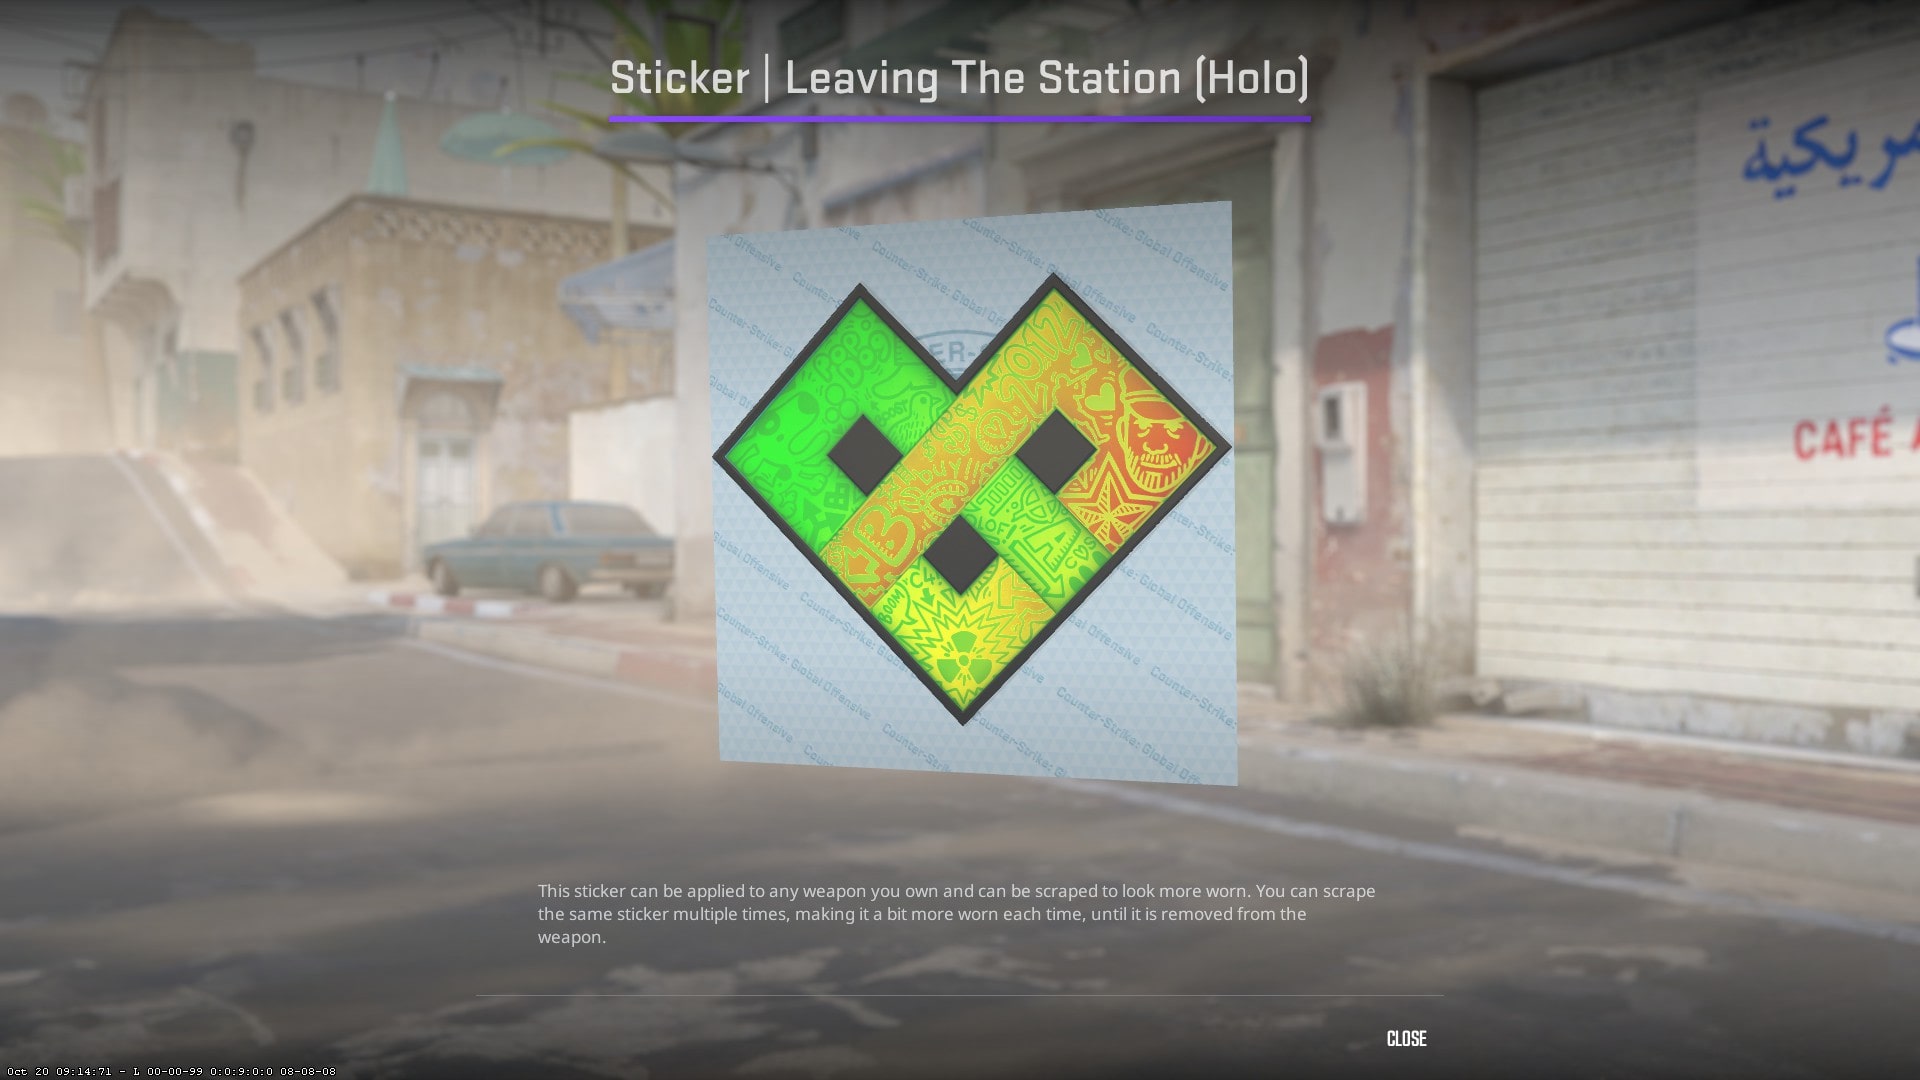 Sticker | Leaving the Station (Holo)